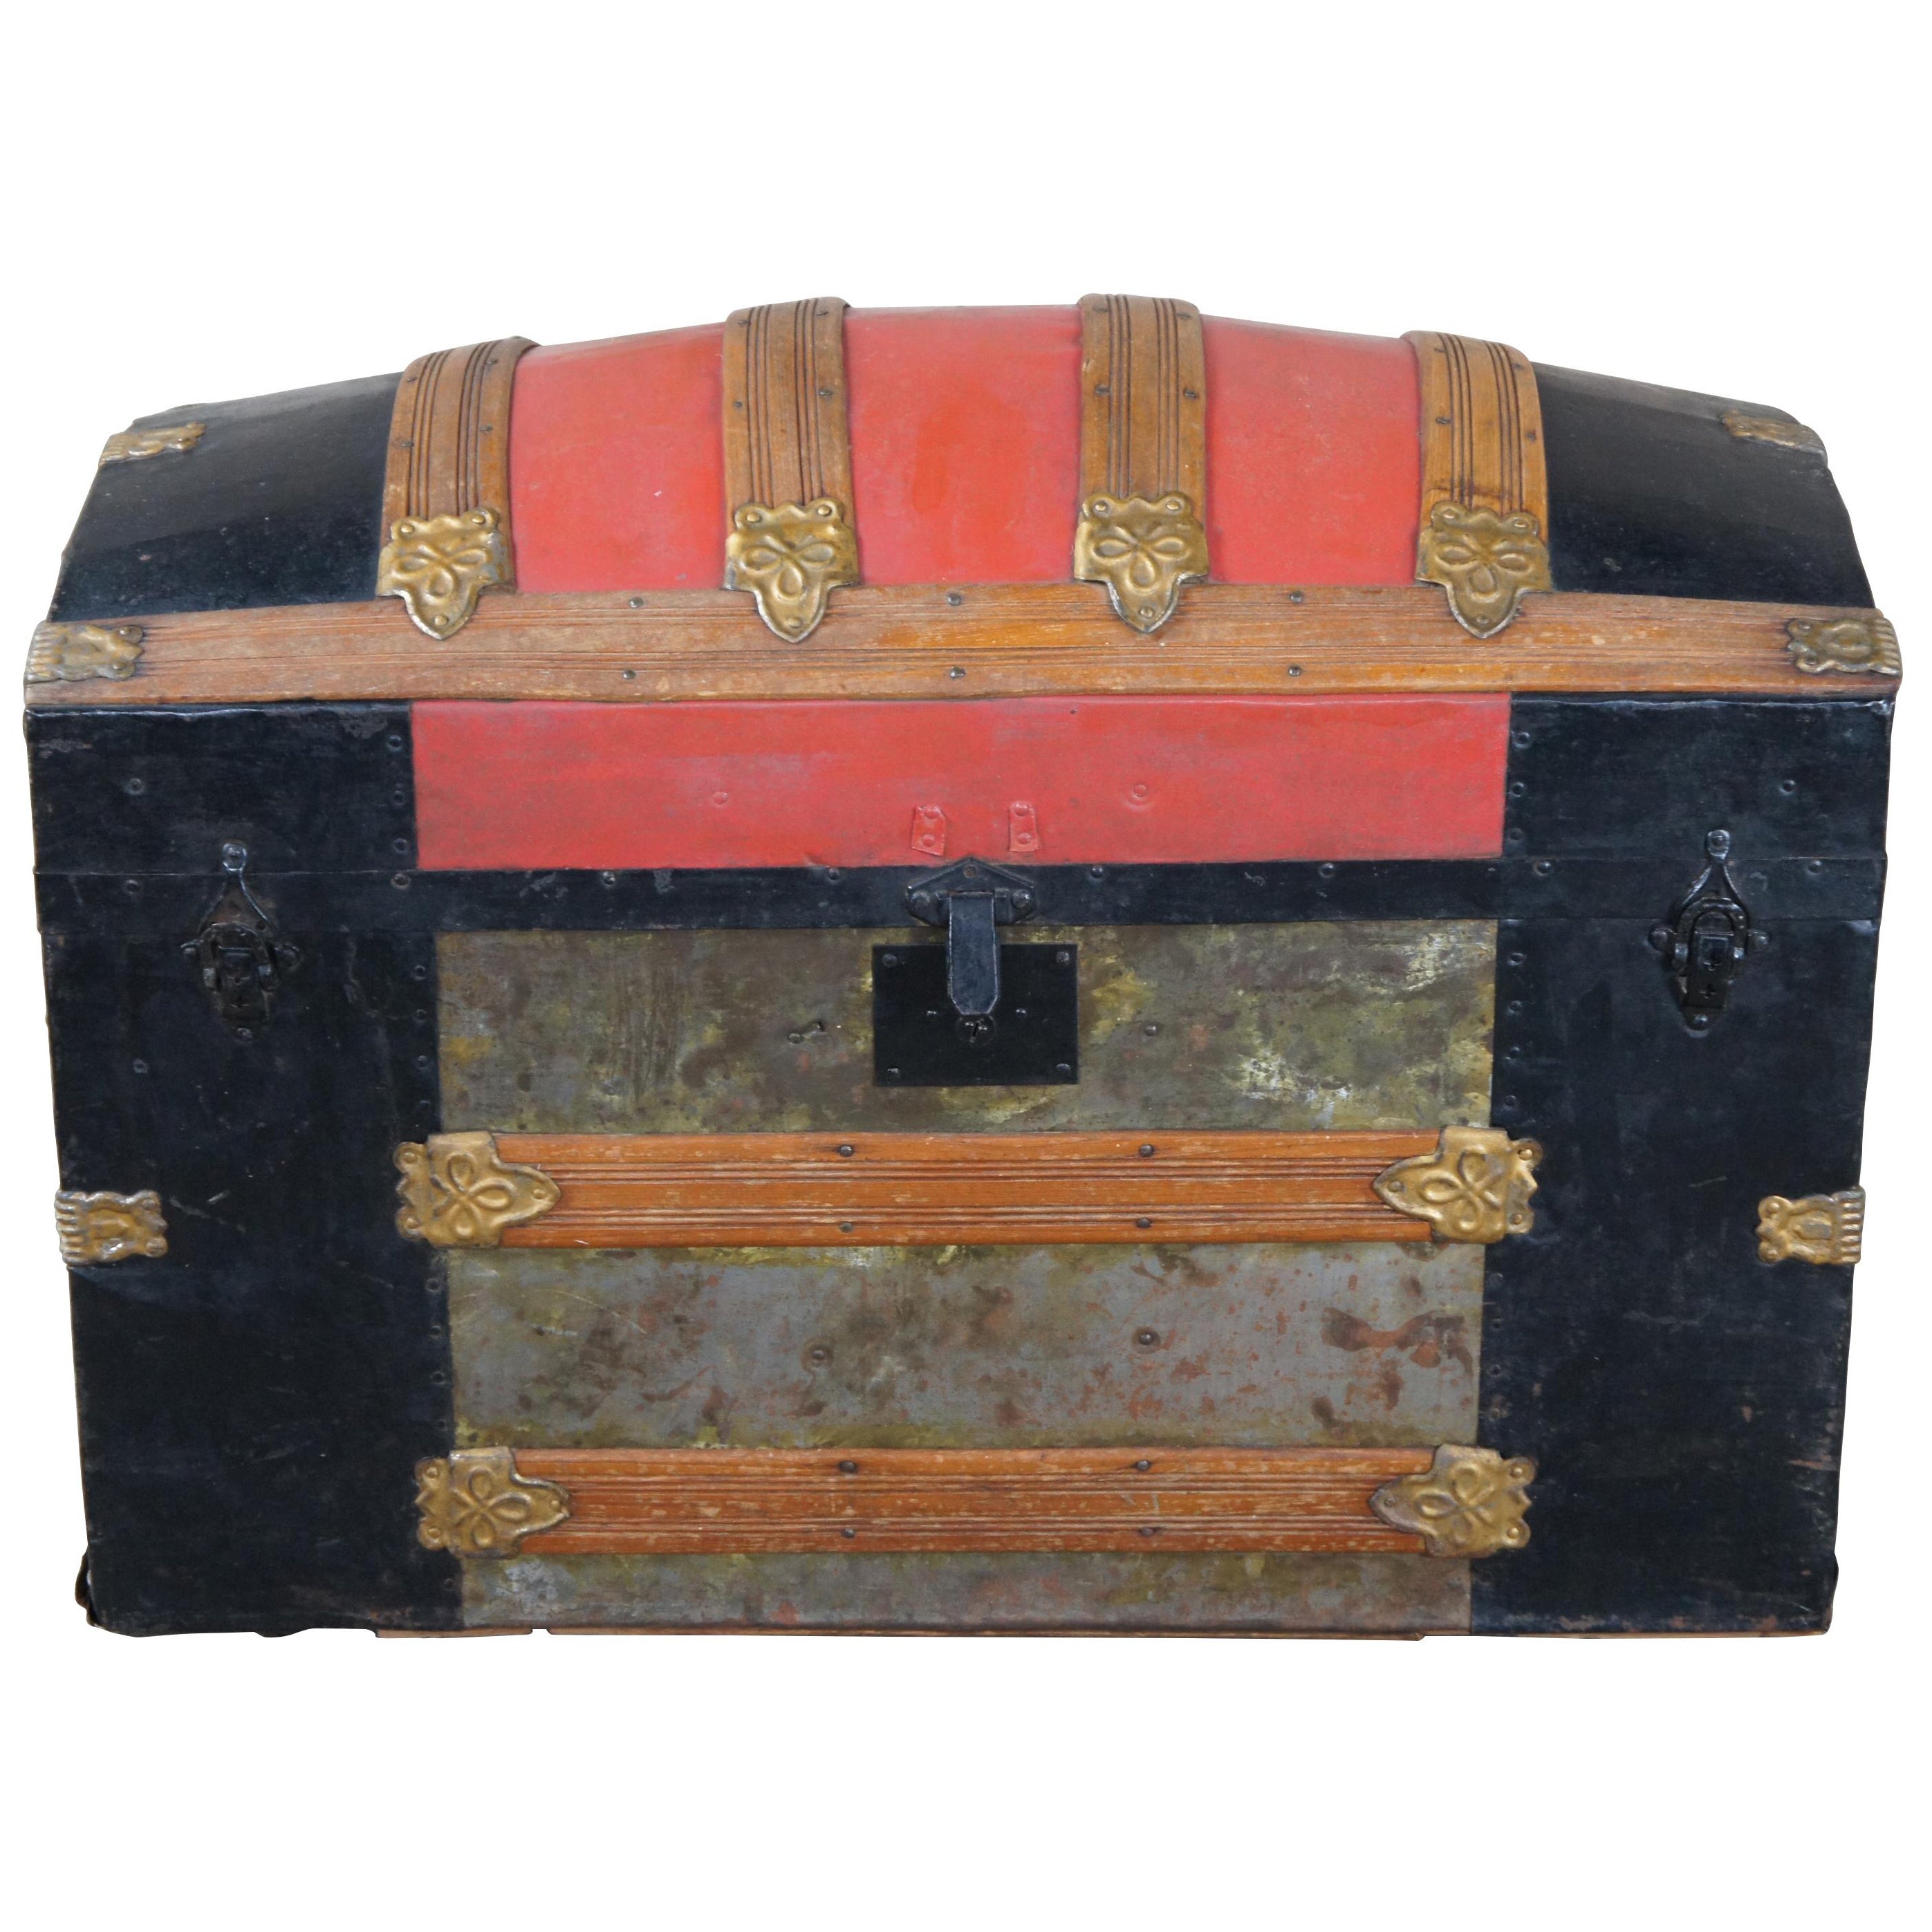 A rare original Victorian dome top or hump back steamer trunk. Includes original inserts with scenes. Made from metal with oak trim, embossed hardware and leather handles.
 